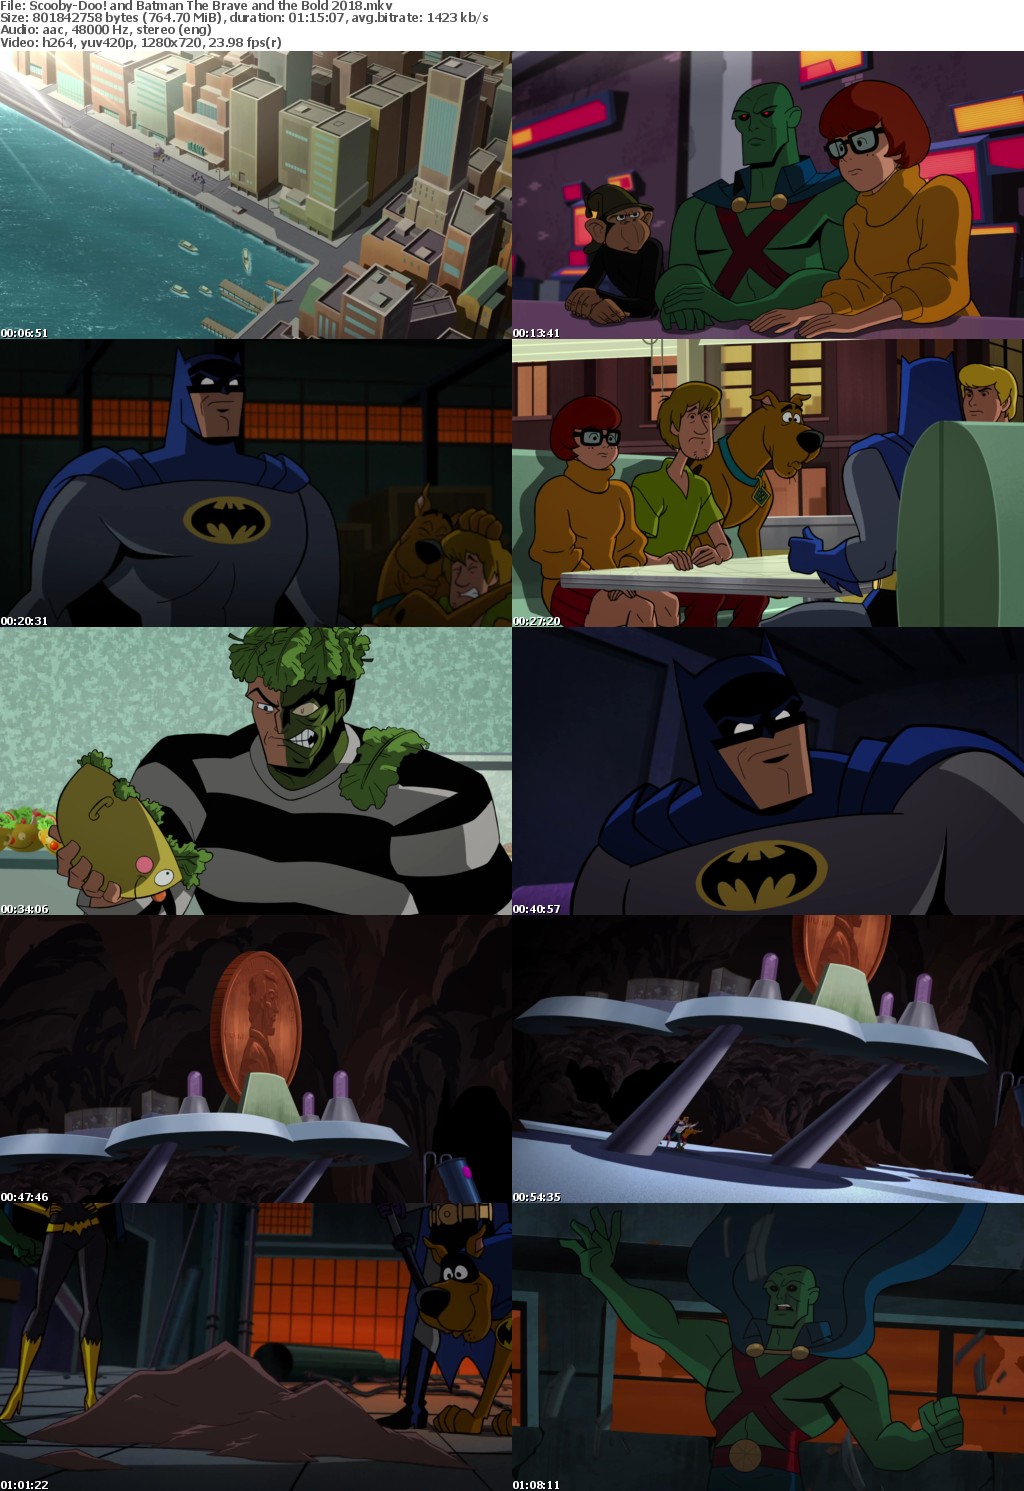 Scooby-Doo! and Batman The Brave and the Bold 2018 720p WEBRip x264 i c